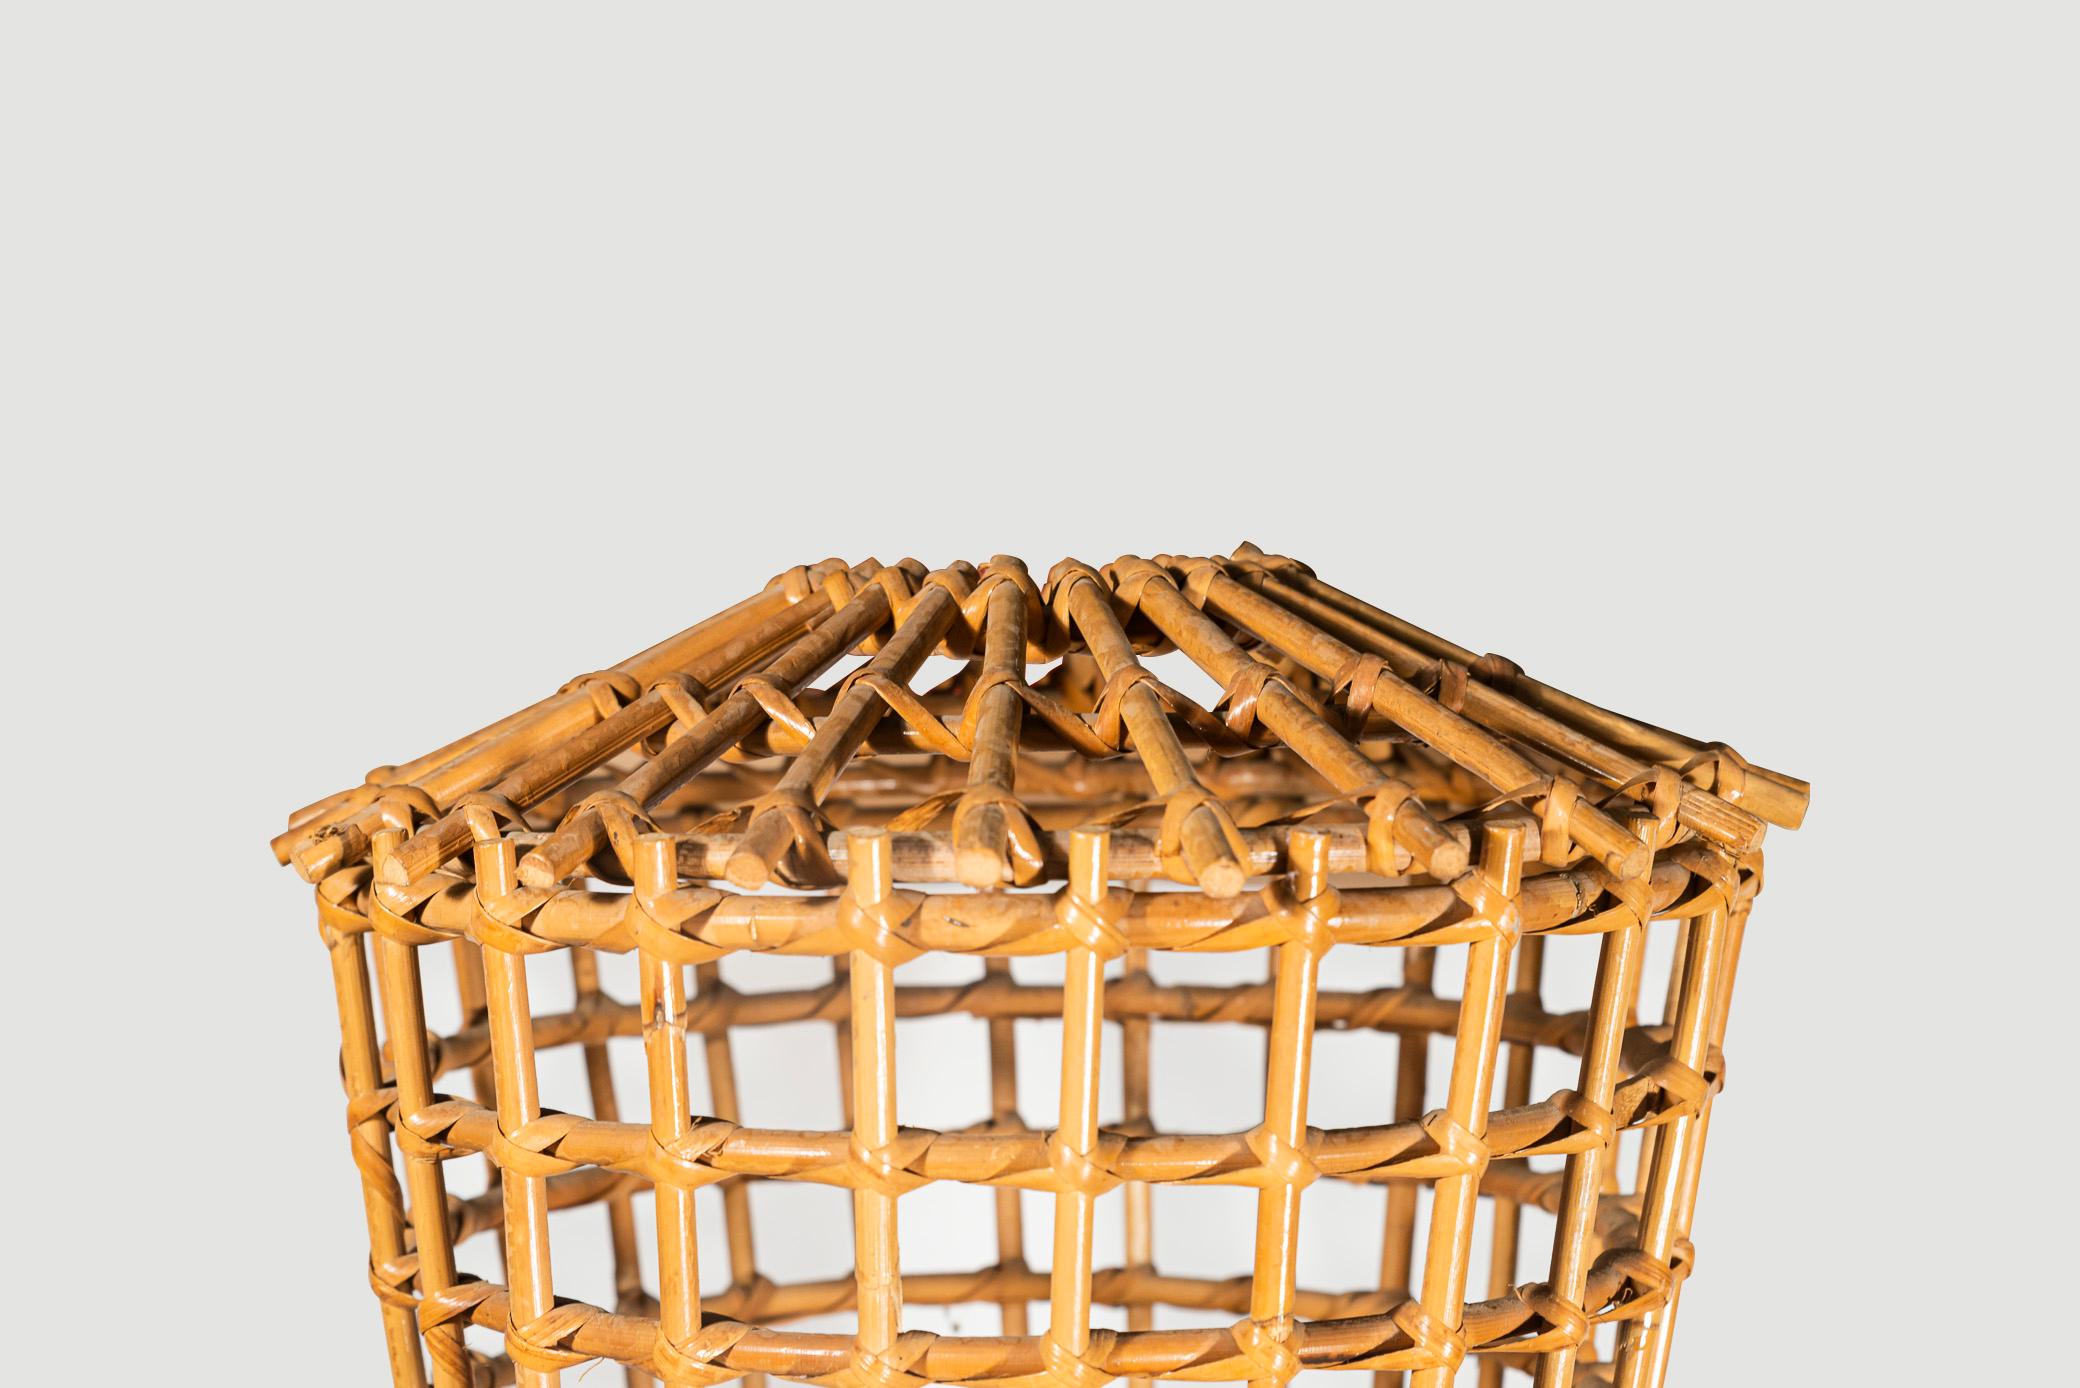 Franco Albini (1905-1977), Floor lamp,
Bamboo and rattan, 
Tripod base, 
the top of the lamp with bamboo decoration assembled forming grids,
Italy, circa 1960.

Measures: Diameter 39 cm, height 160 cm.

Franco Albini graduated in architecture from